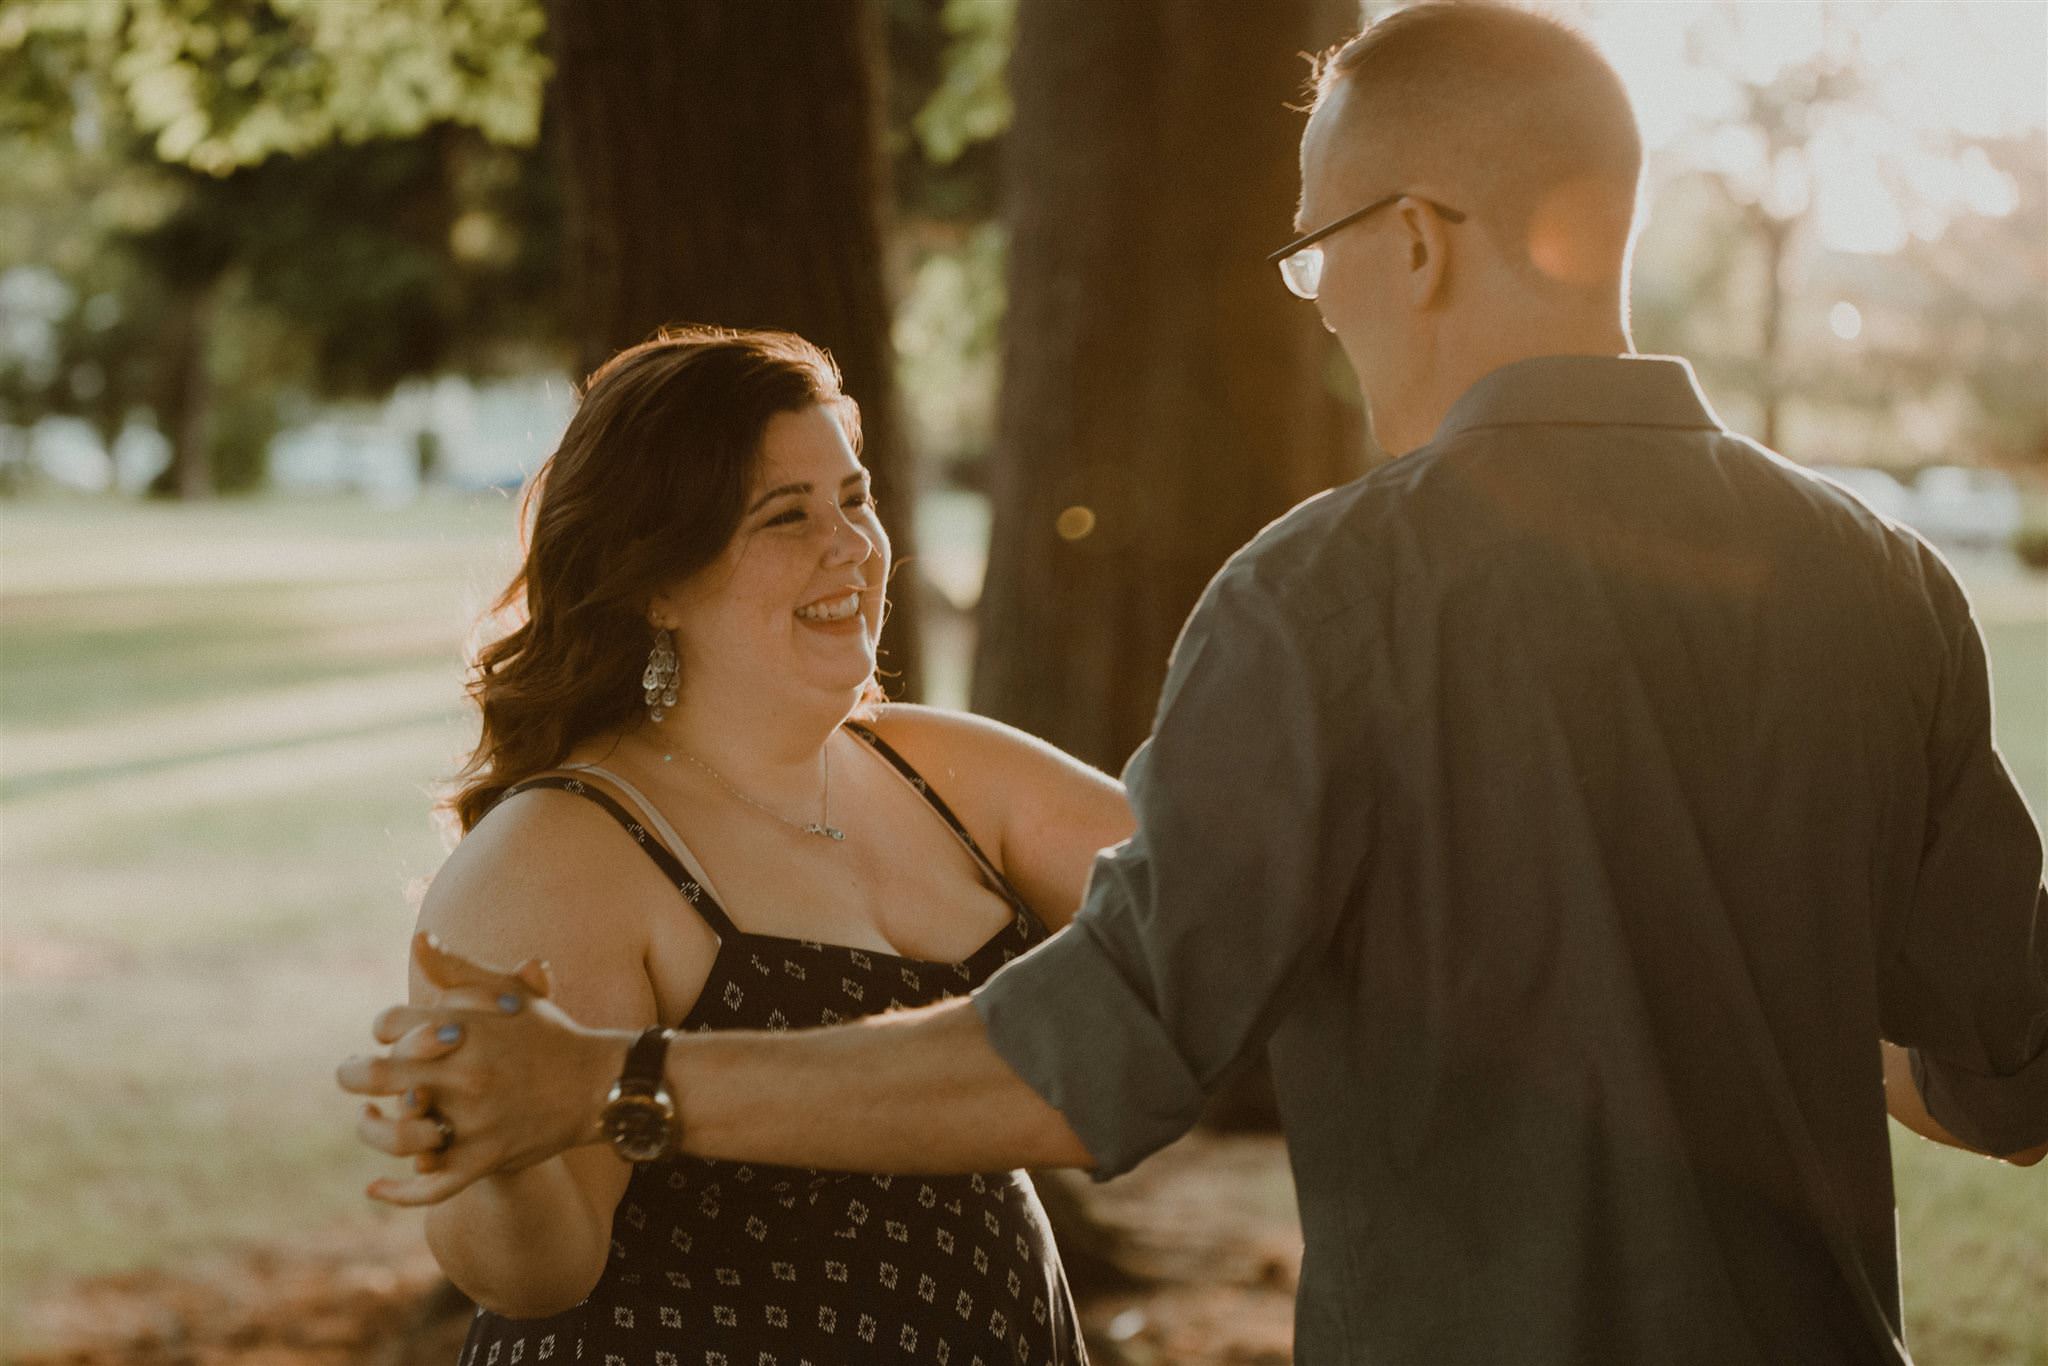 Married couple dancing in the park during summer | PNW couples portraits | www.photomegs.com